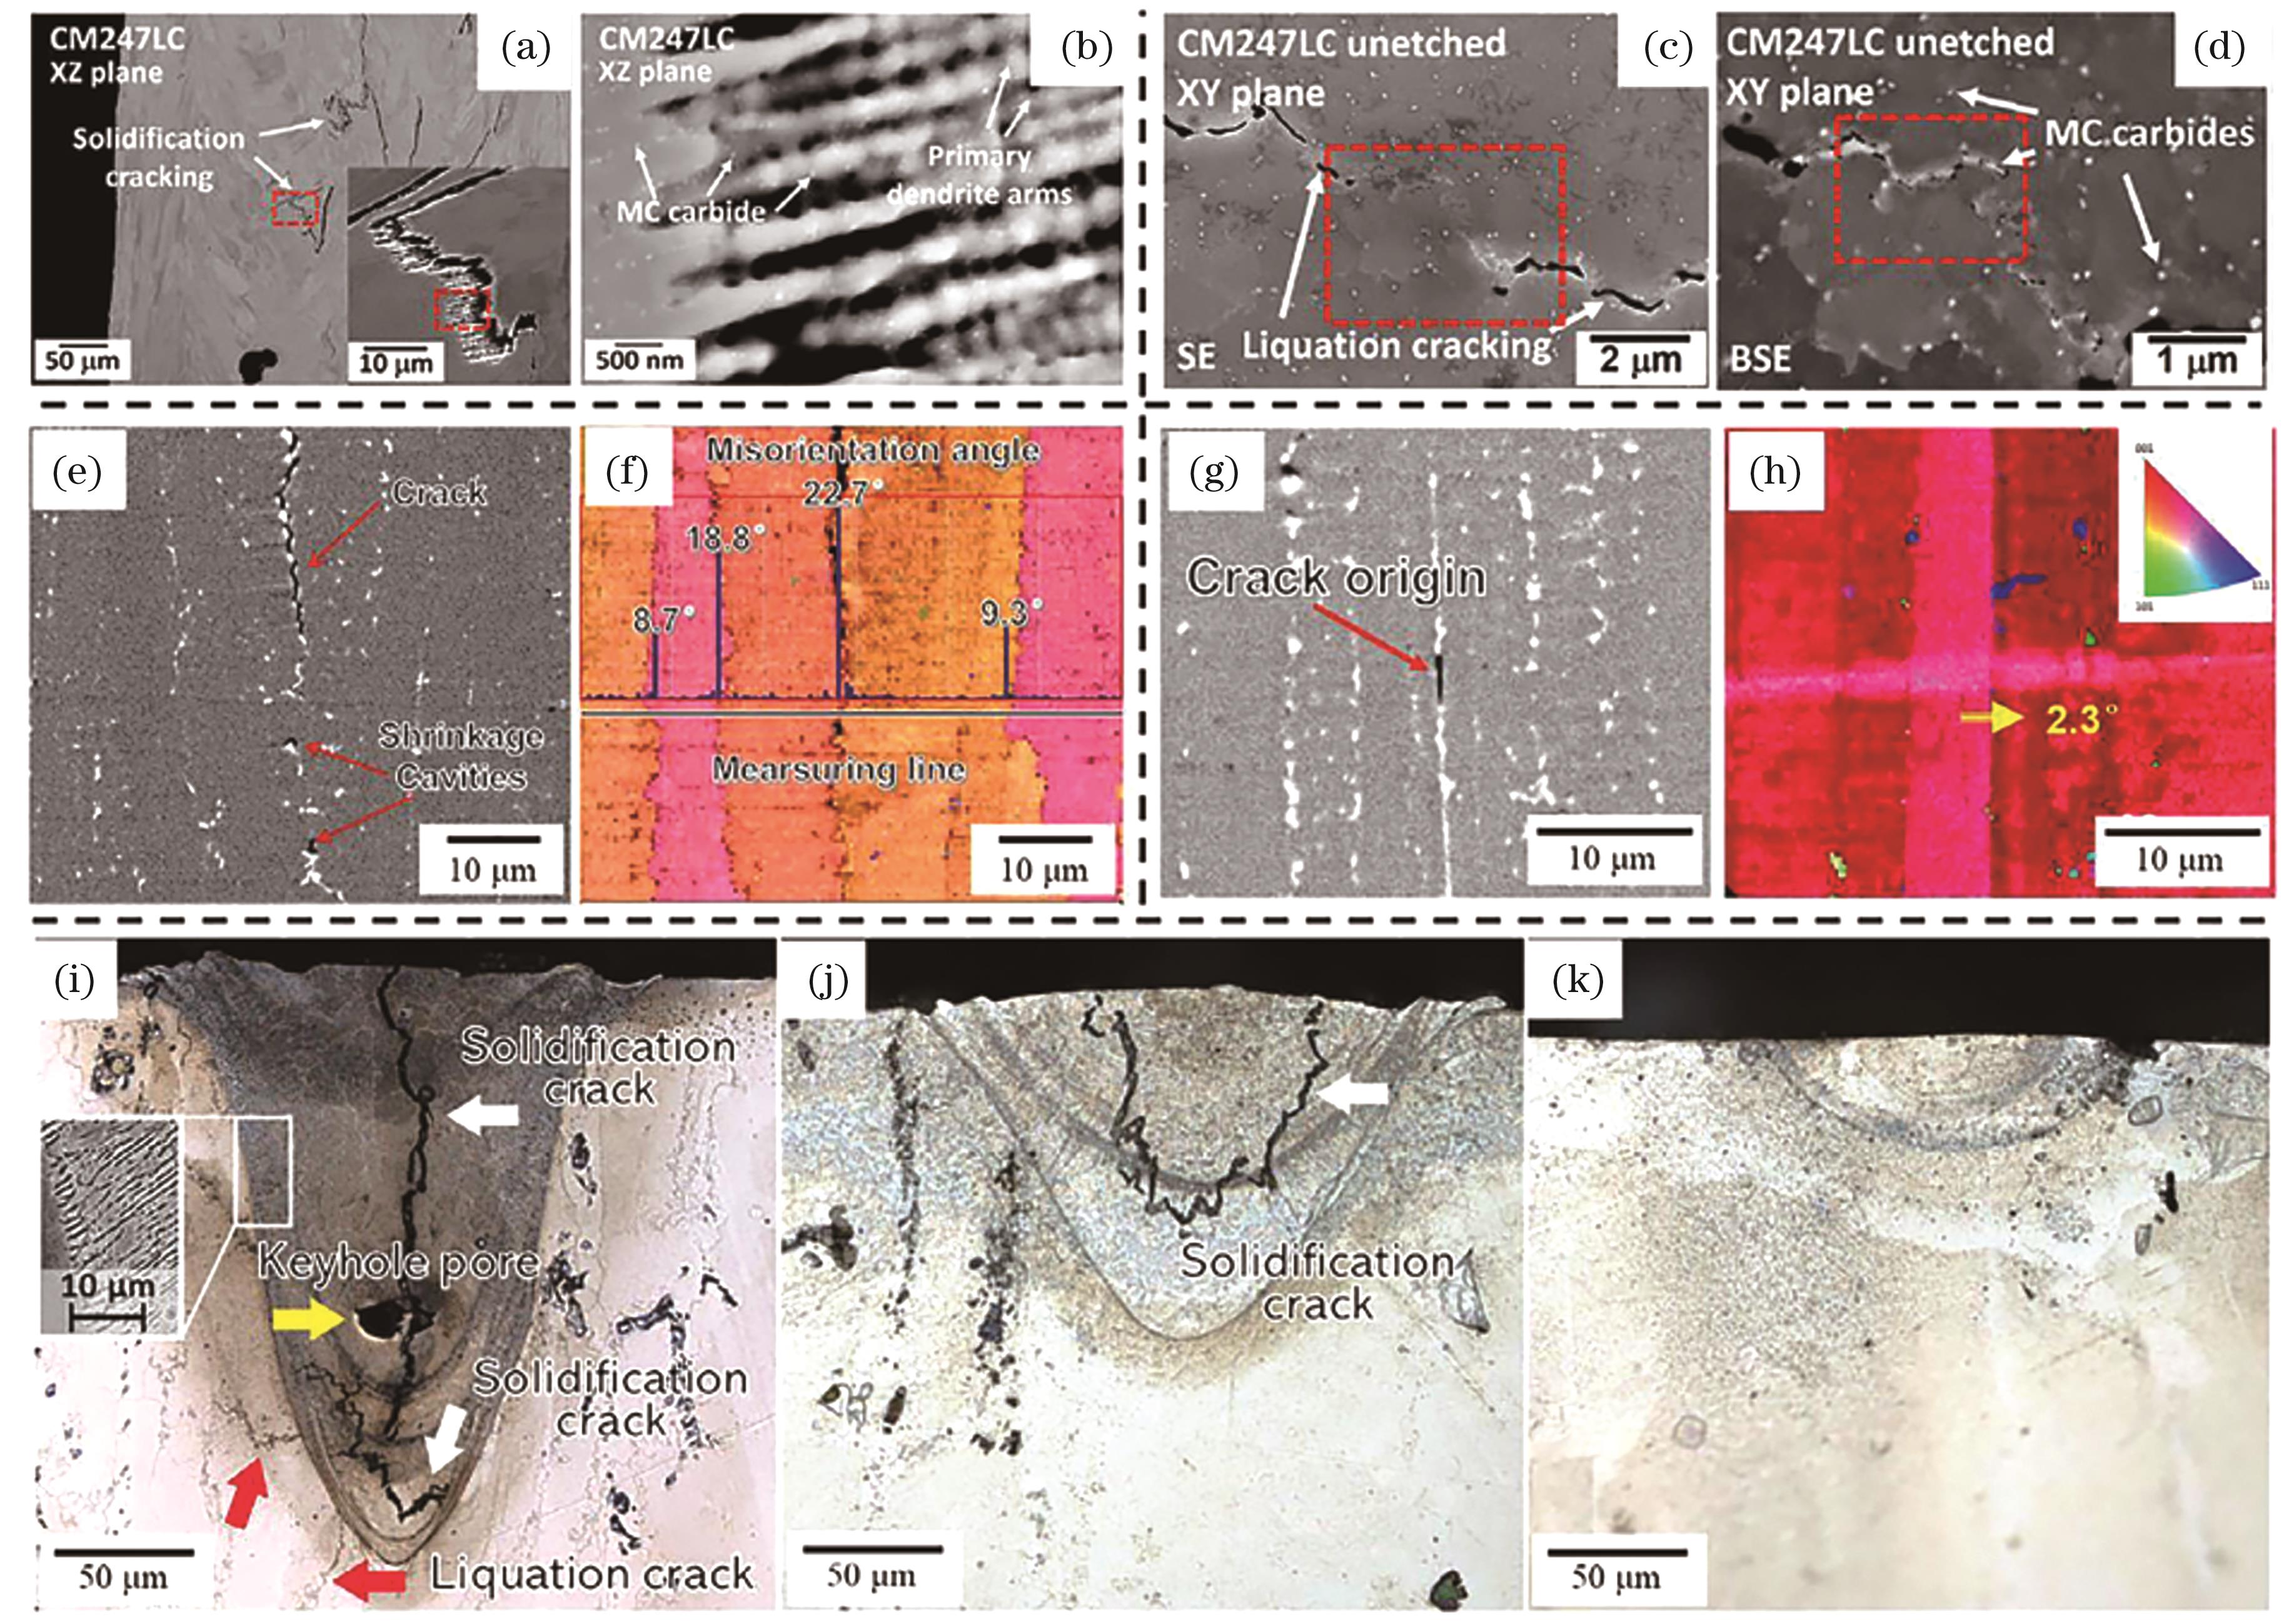 Typical thermal cracks[35-37]. (a)(b) Solidification cracks with irregular dendritic morphology; (c)(d) liquefaction cracks without dendritic characteristics; (e)(f) solidification cracks; (g)(h) morphology and dislocation maps of the liquefaction crack region; (i)‒(k) single pass of LPBFed AA7075 alloy shows different pool shapes and thermal crack sensitivities